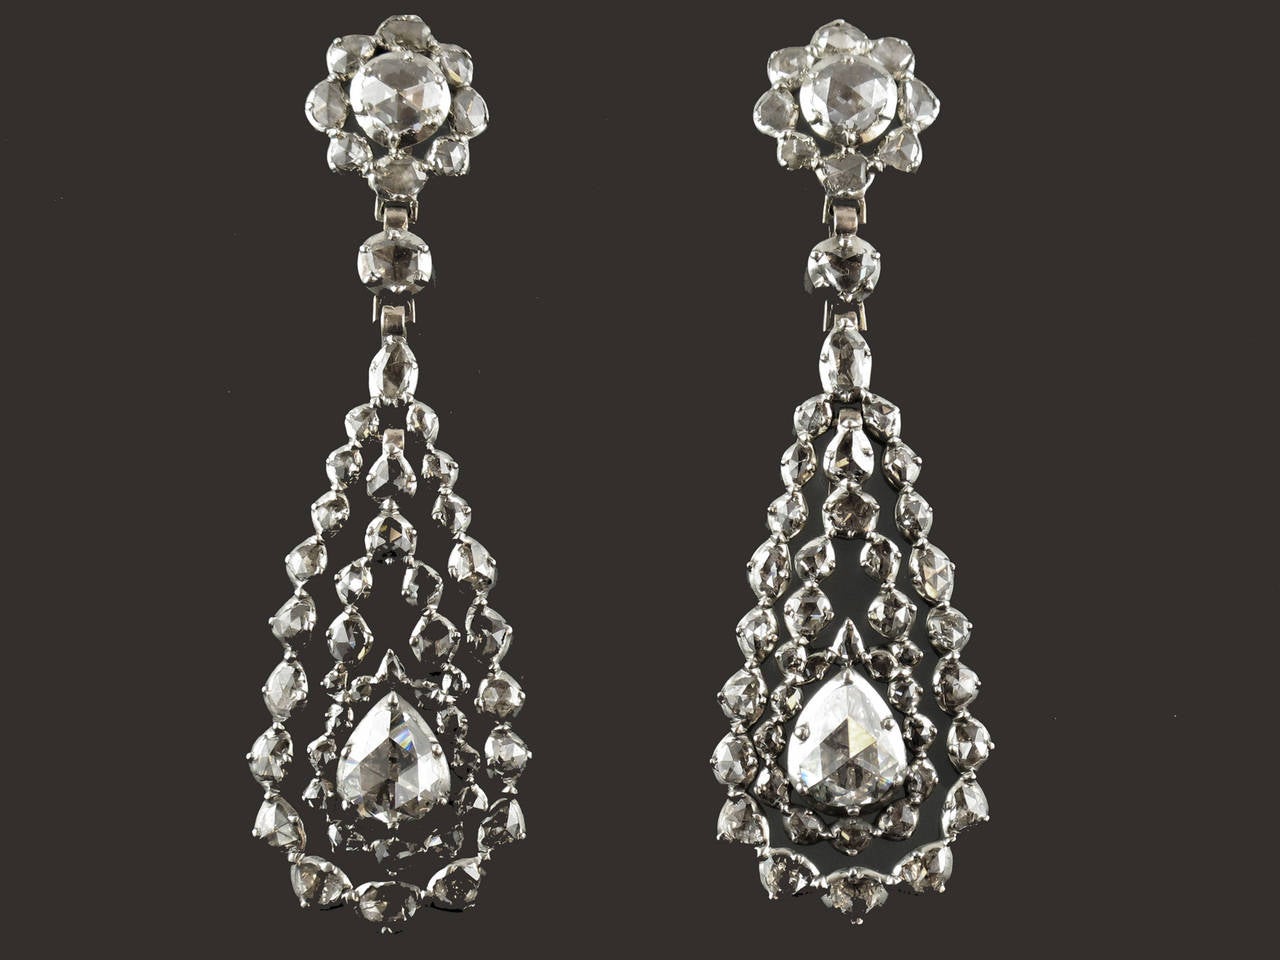 A pair of very fine Georgian silver topped, yellow gold rose-cut diamond earrings. Pendeloque design. Probably Dutch, late XVIII Century.